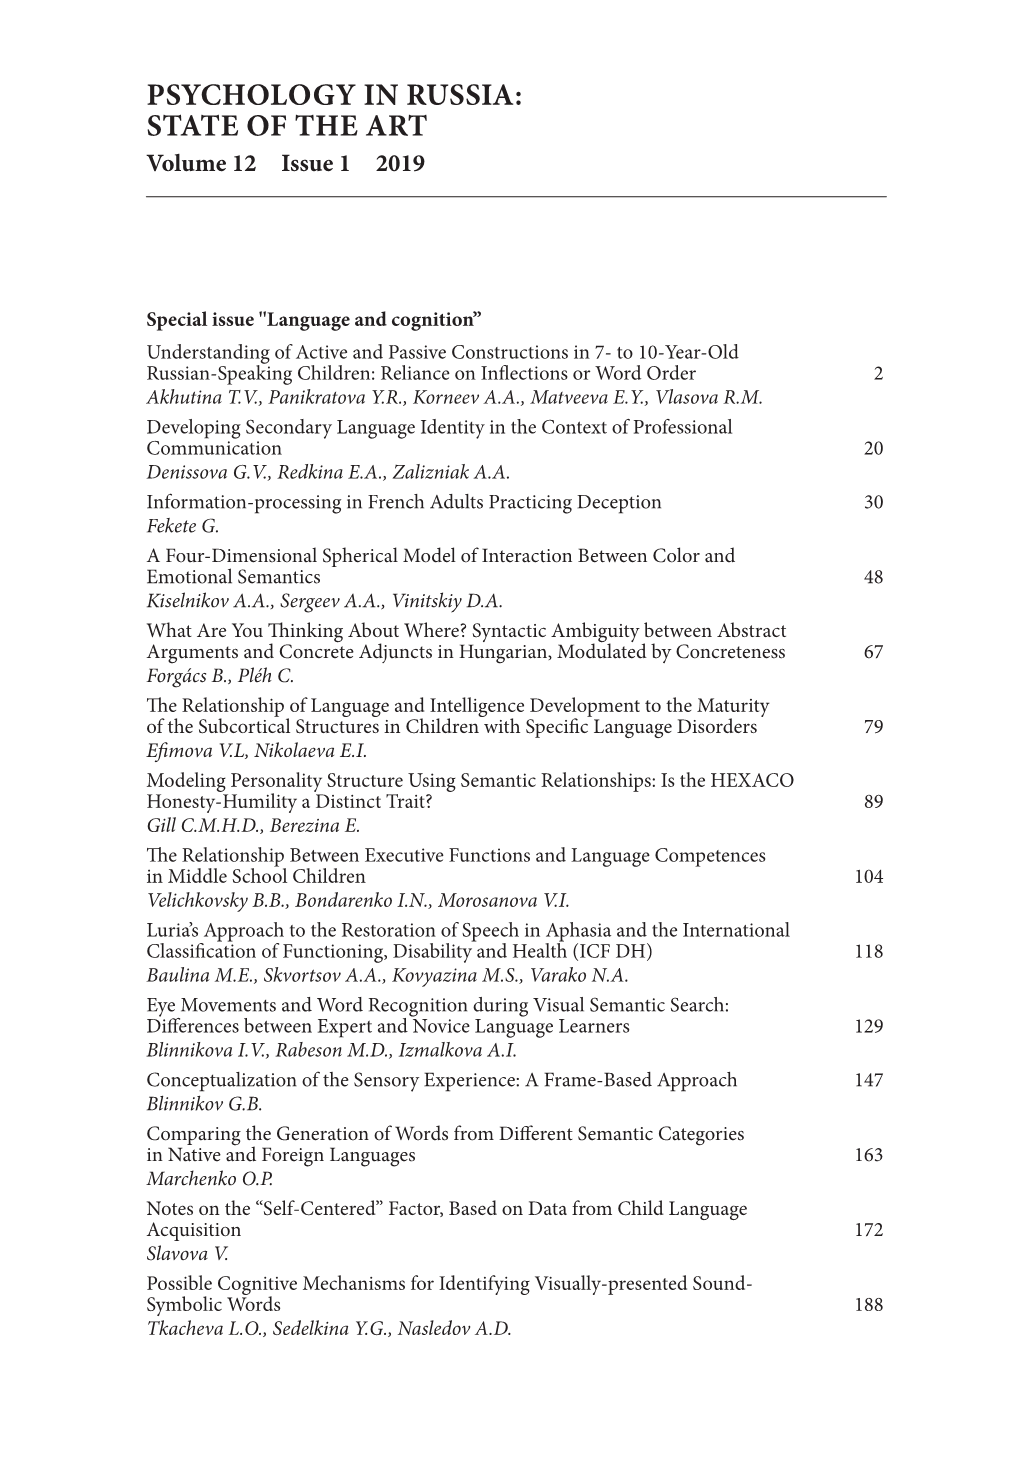 Psychology in Russia: State of the Art Volume 12 Issue 1 2019